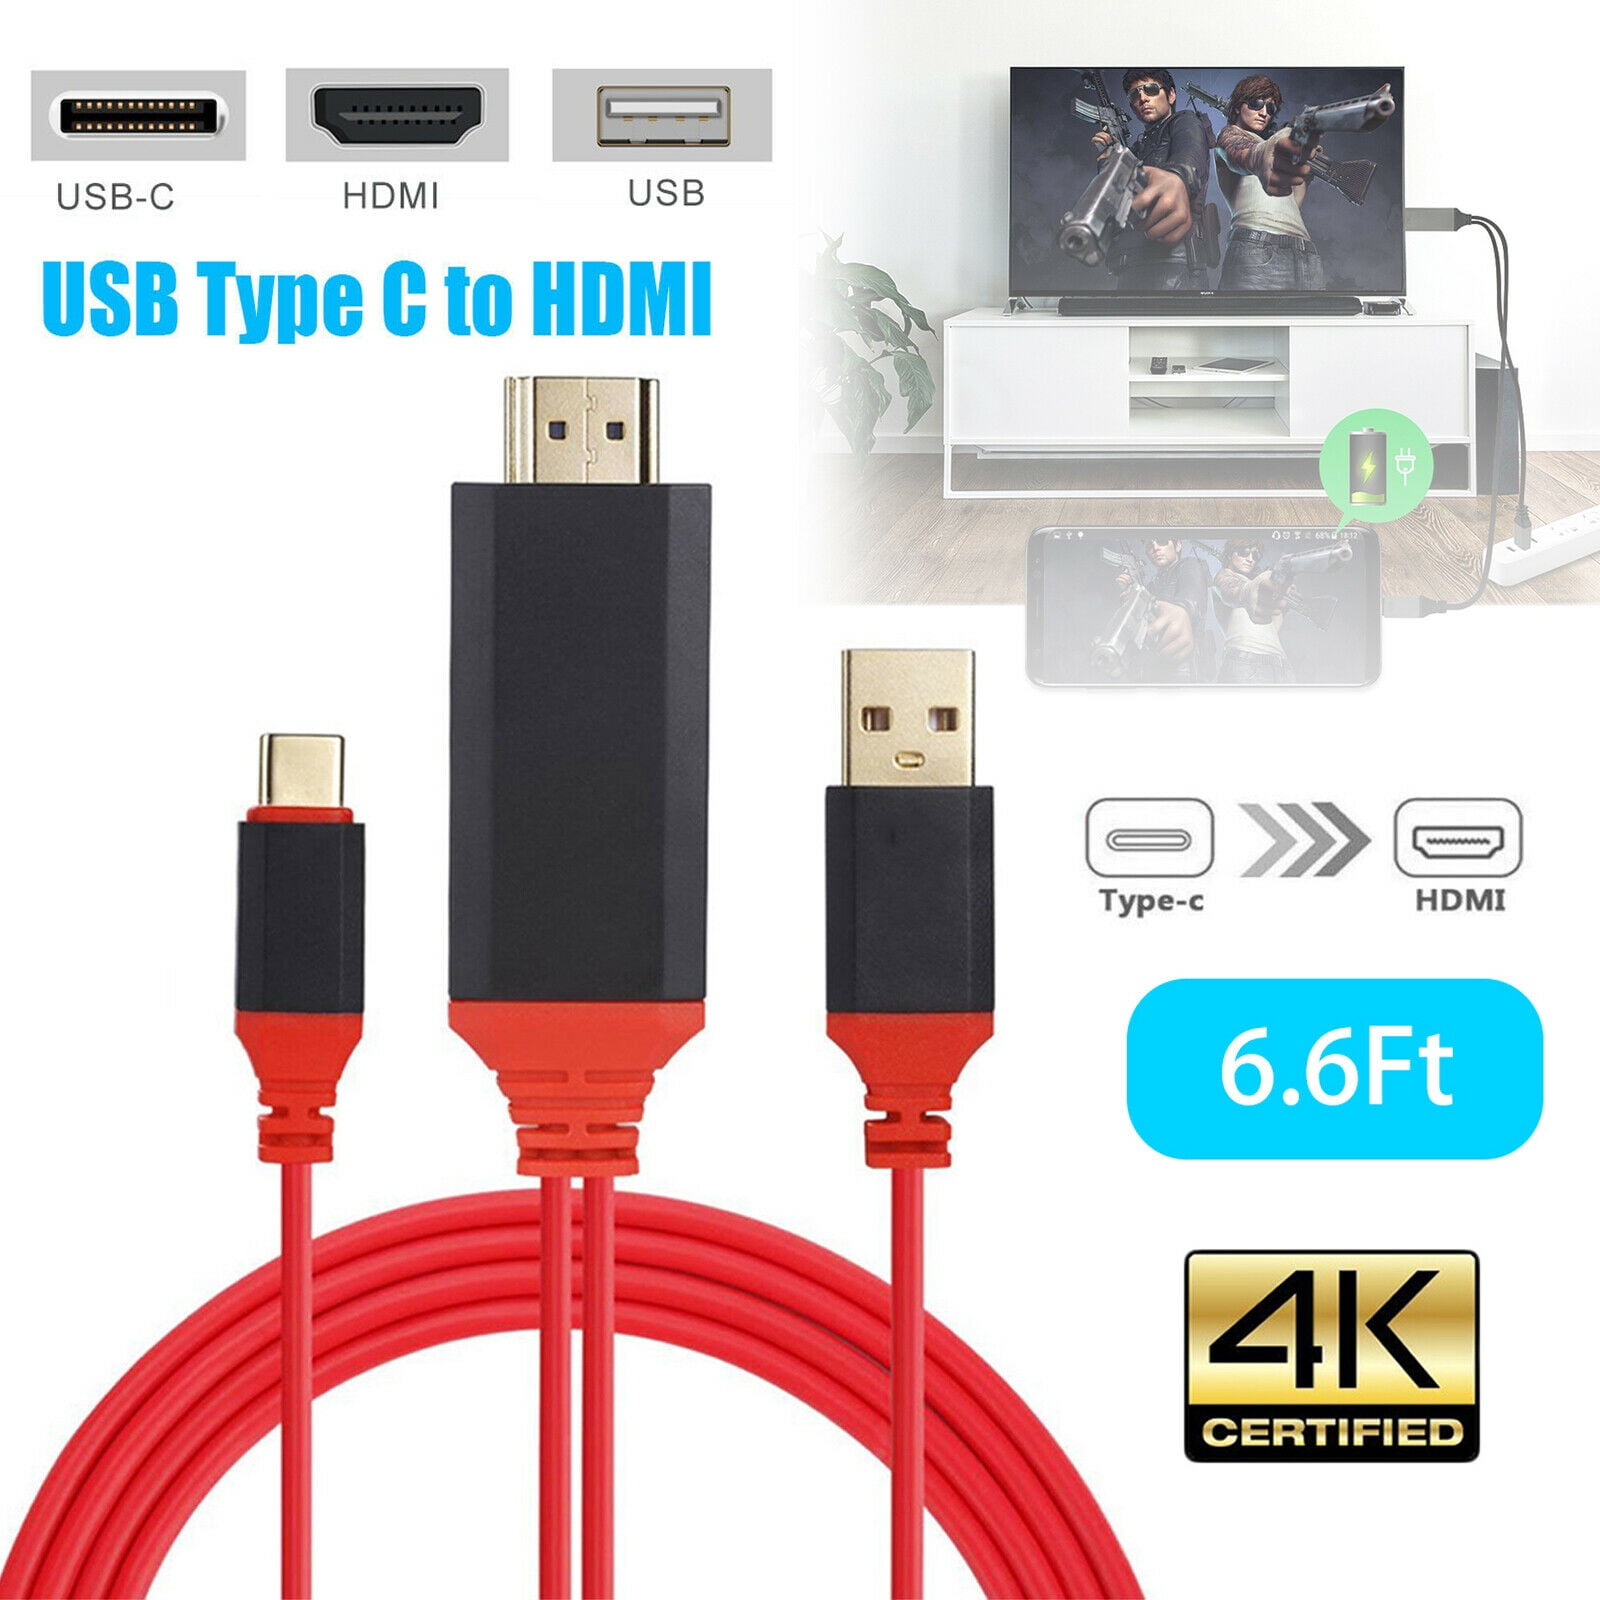 USB 3.1 to HDMI HDTV Cable Adapter for Samsung Galaxy S10 S9 Note 8 6.6FT USB to HDMI Cable for Home Office - Walmart.com